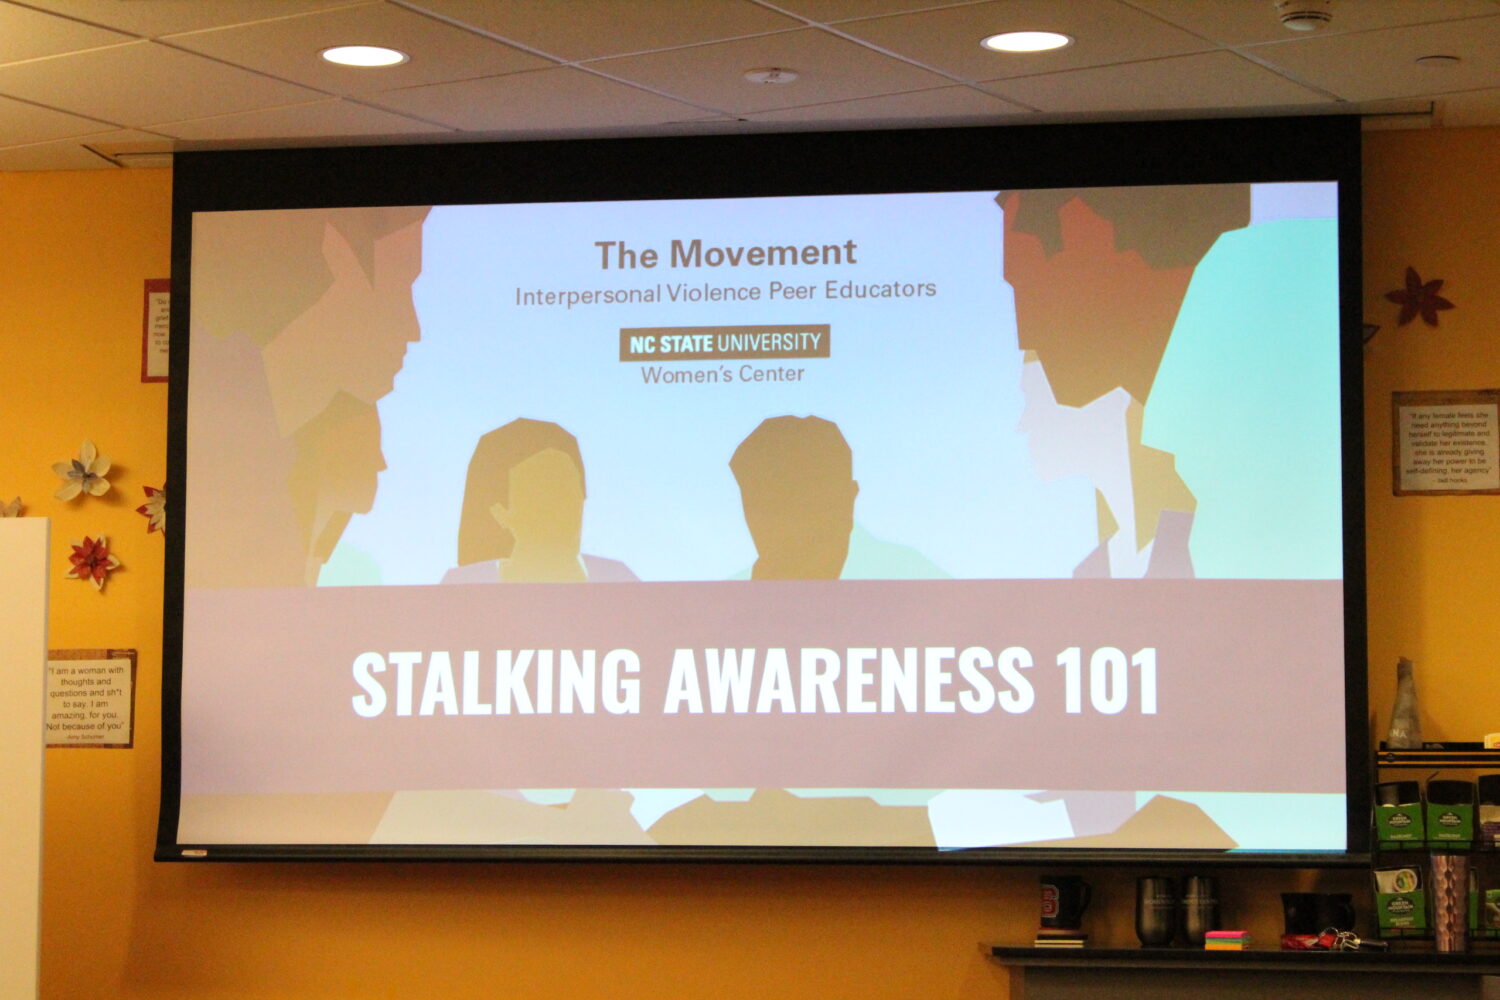 Projection of a PowerPoint Slide for a Stalking Awareness 101 Workshop